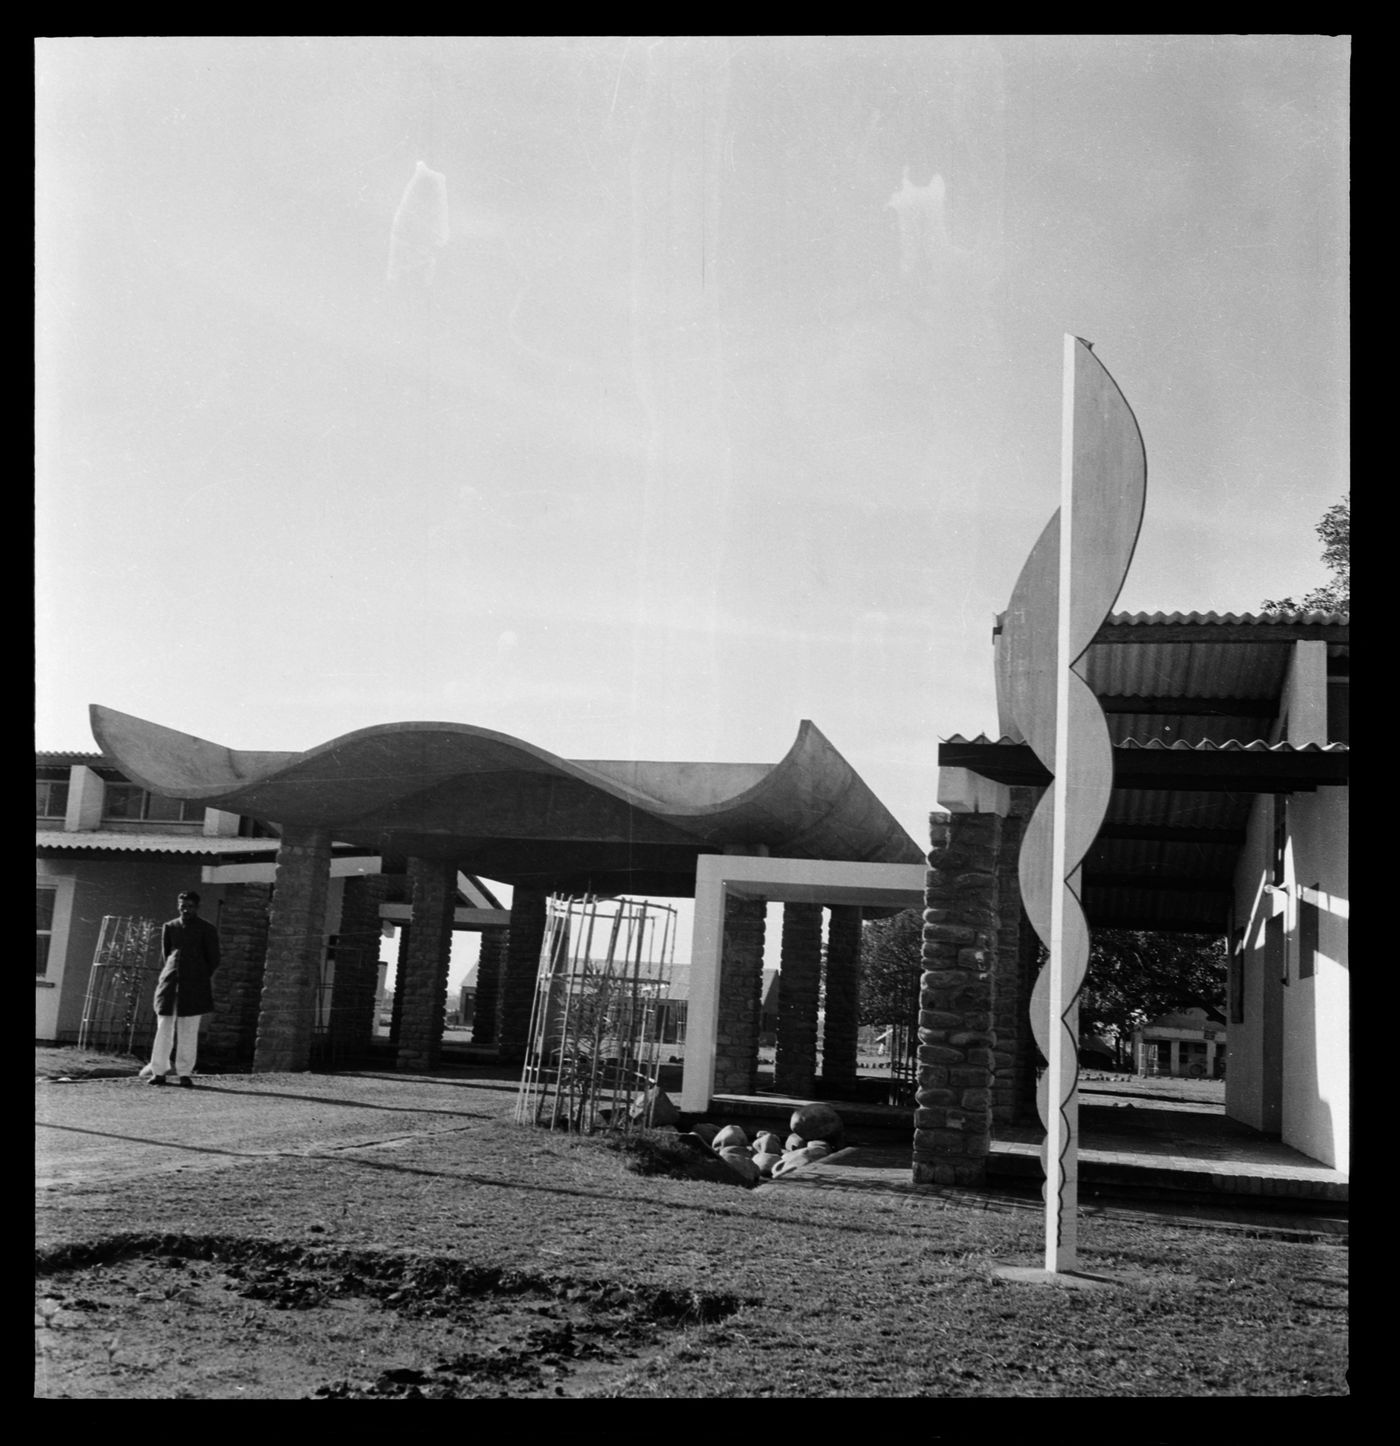 View of the Architect's Office's portico and a sculpture, Sector 19, Chandigarh, India